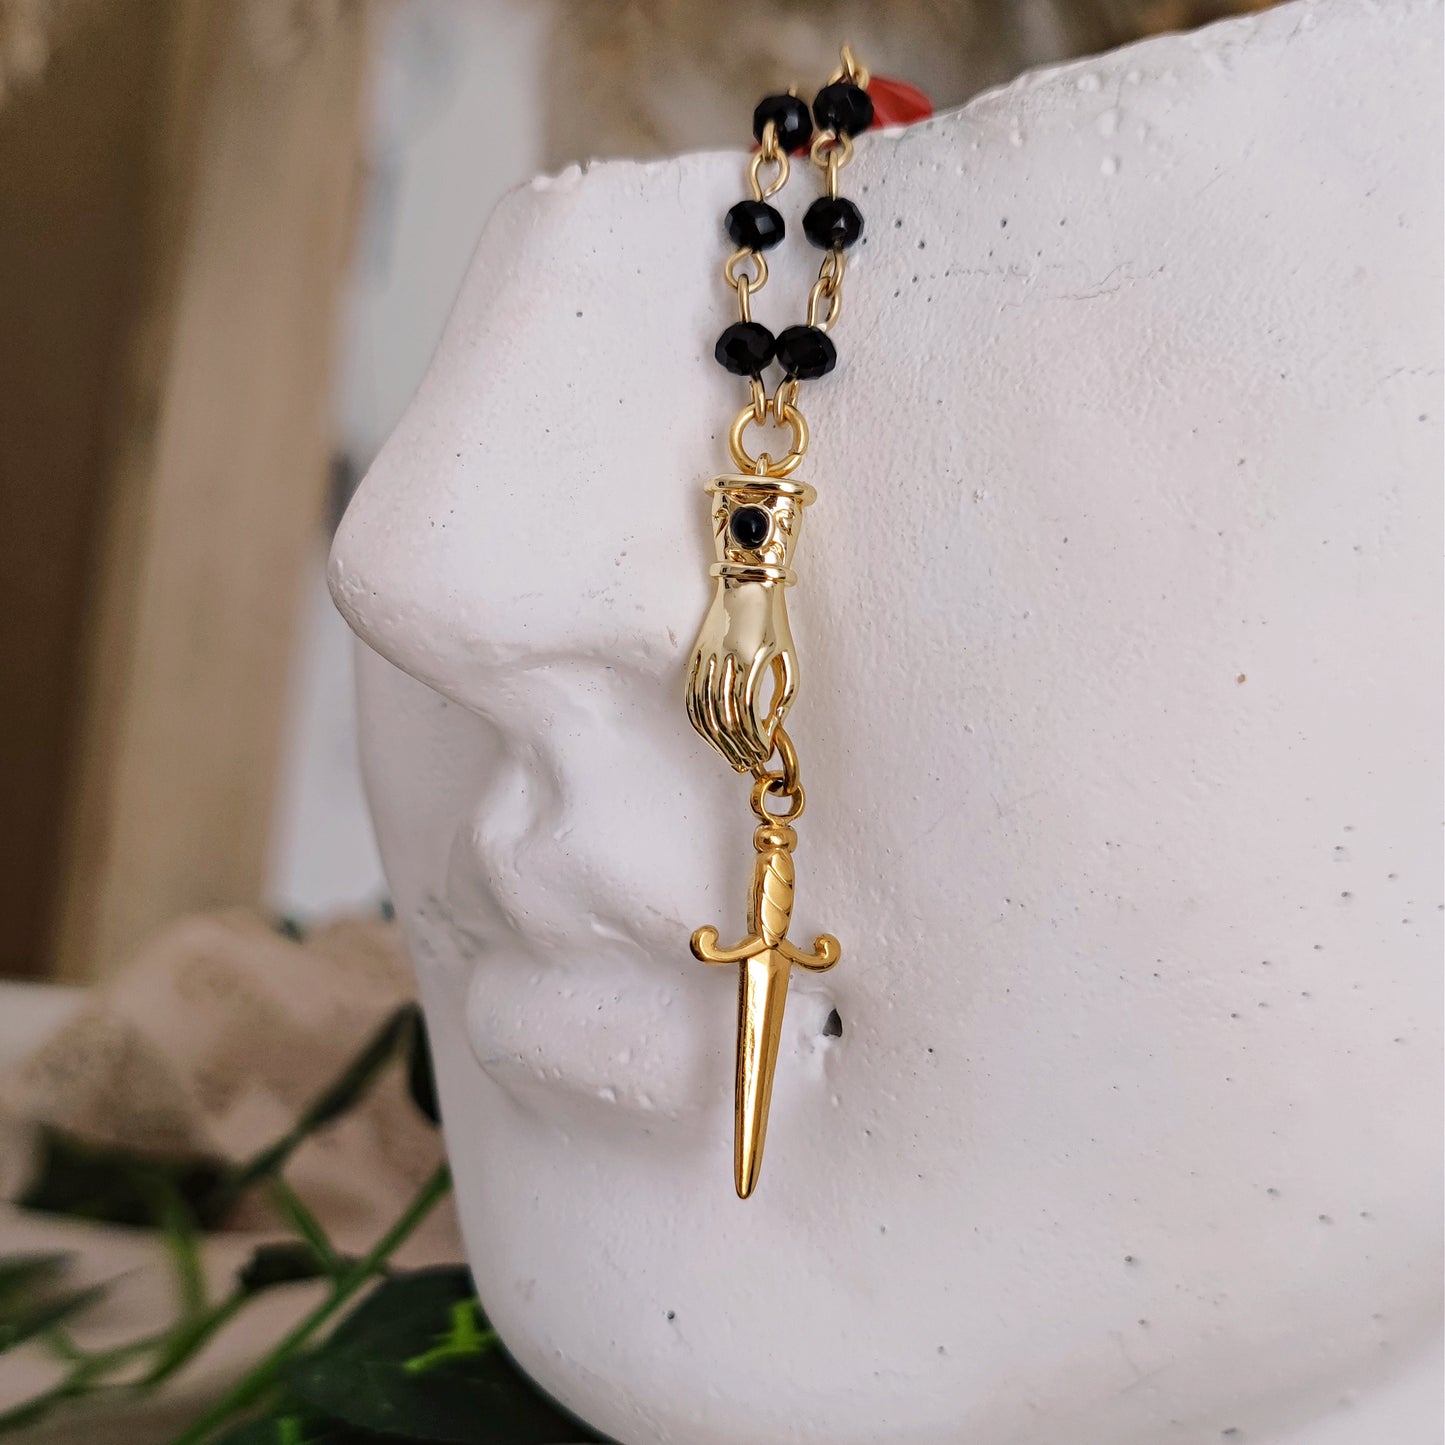 "Ares" Necklace with dagger and gloved hand